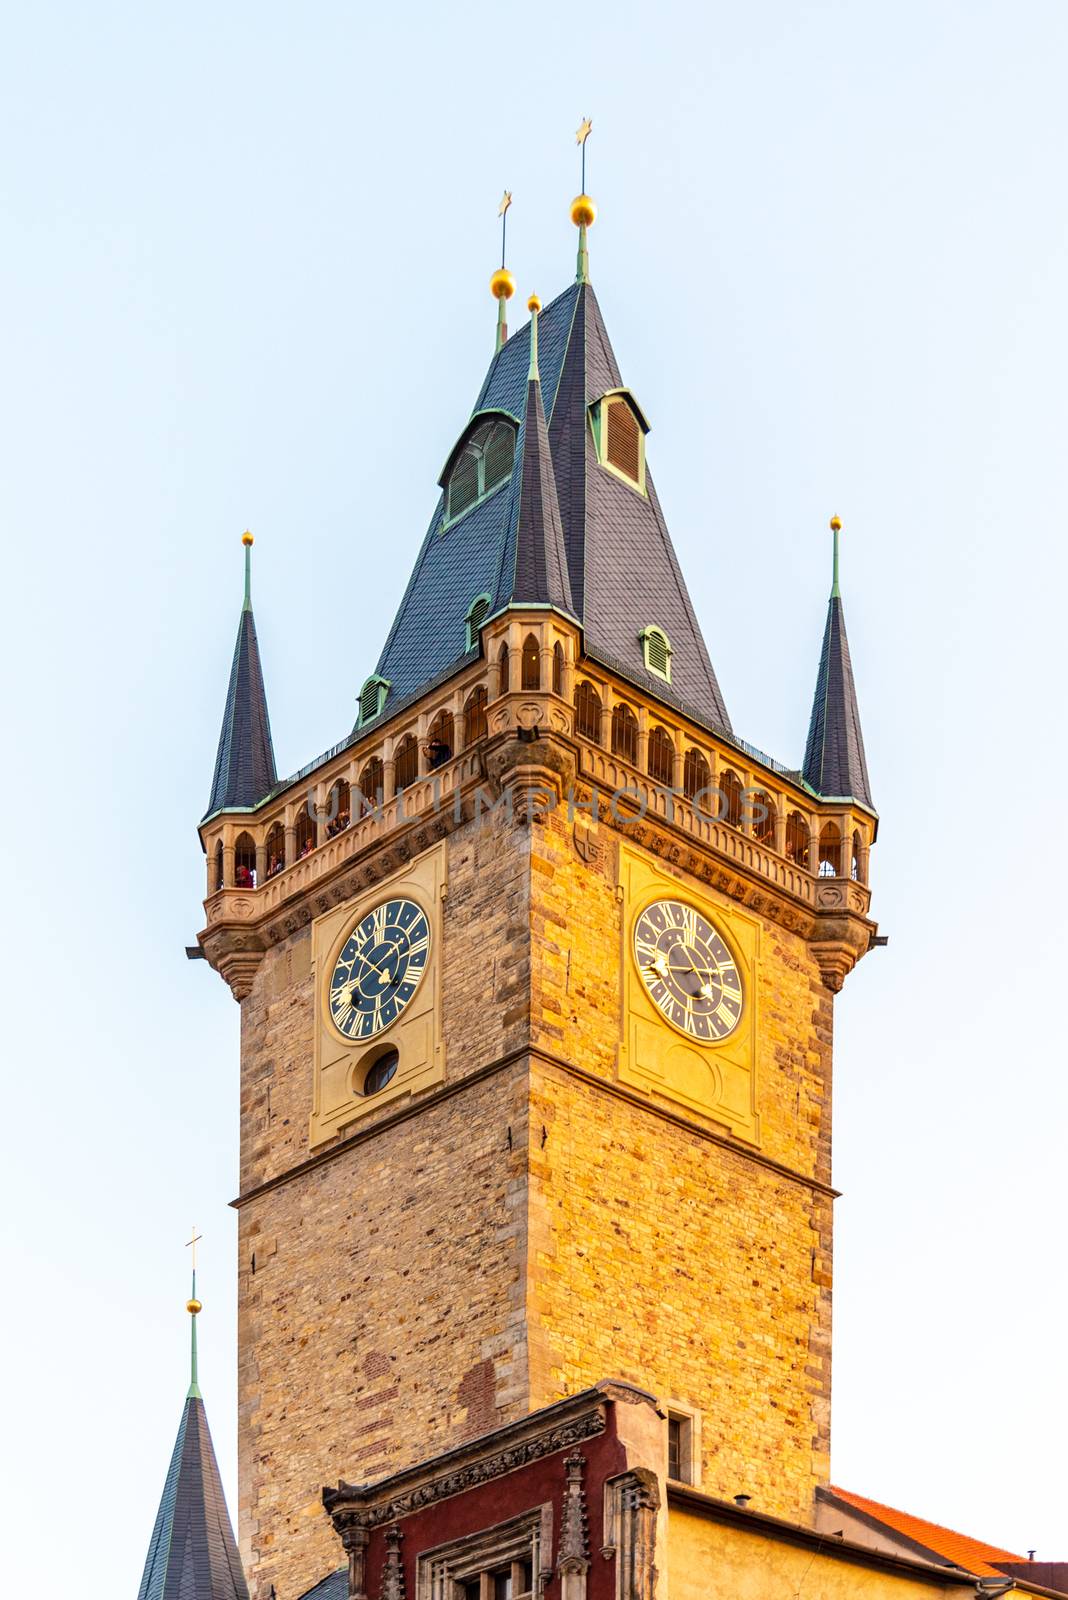 Detailed view of Old Town Hall Tower, Old Town Square, Prague, Czech Republic.